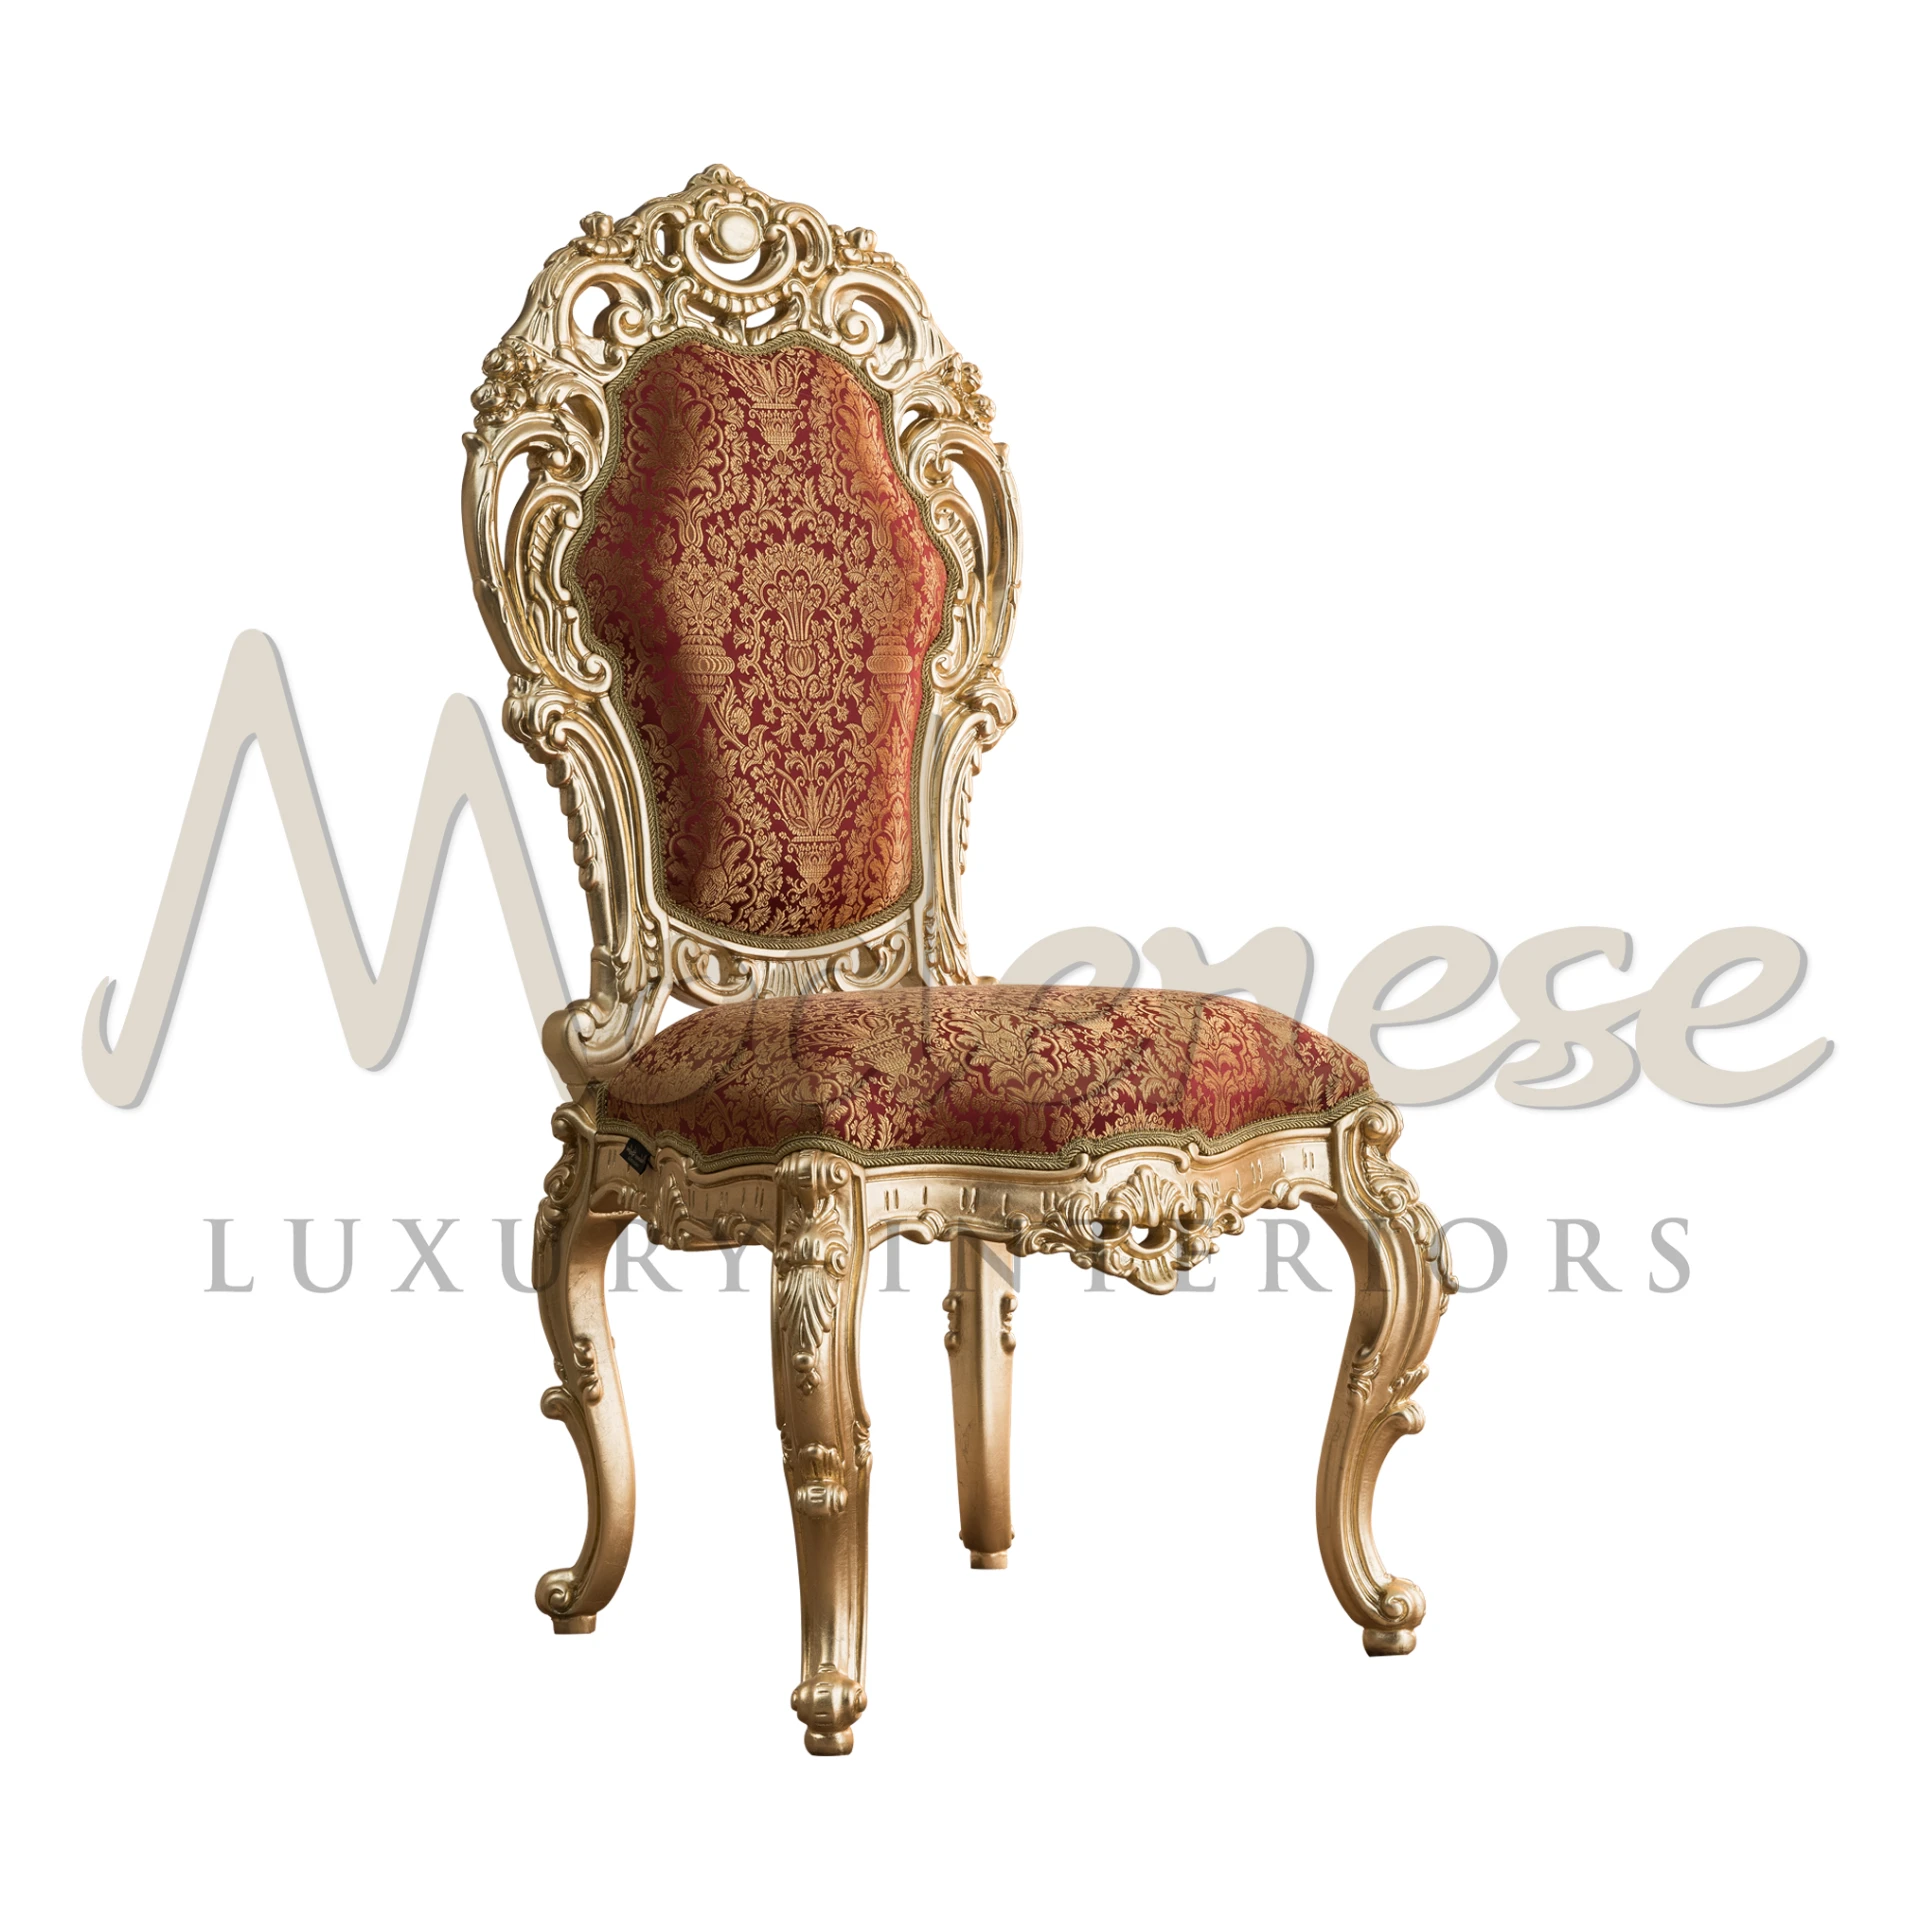 Transform your classical mansion with Modenese Furniture's baroque masterpiece. Hand-carved squiggle details, gold leaves, and patterned fabric create regal opulence.